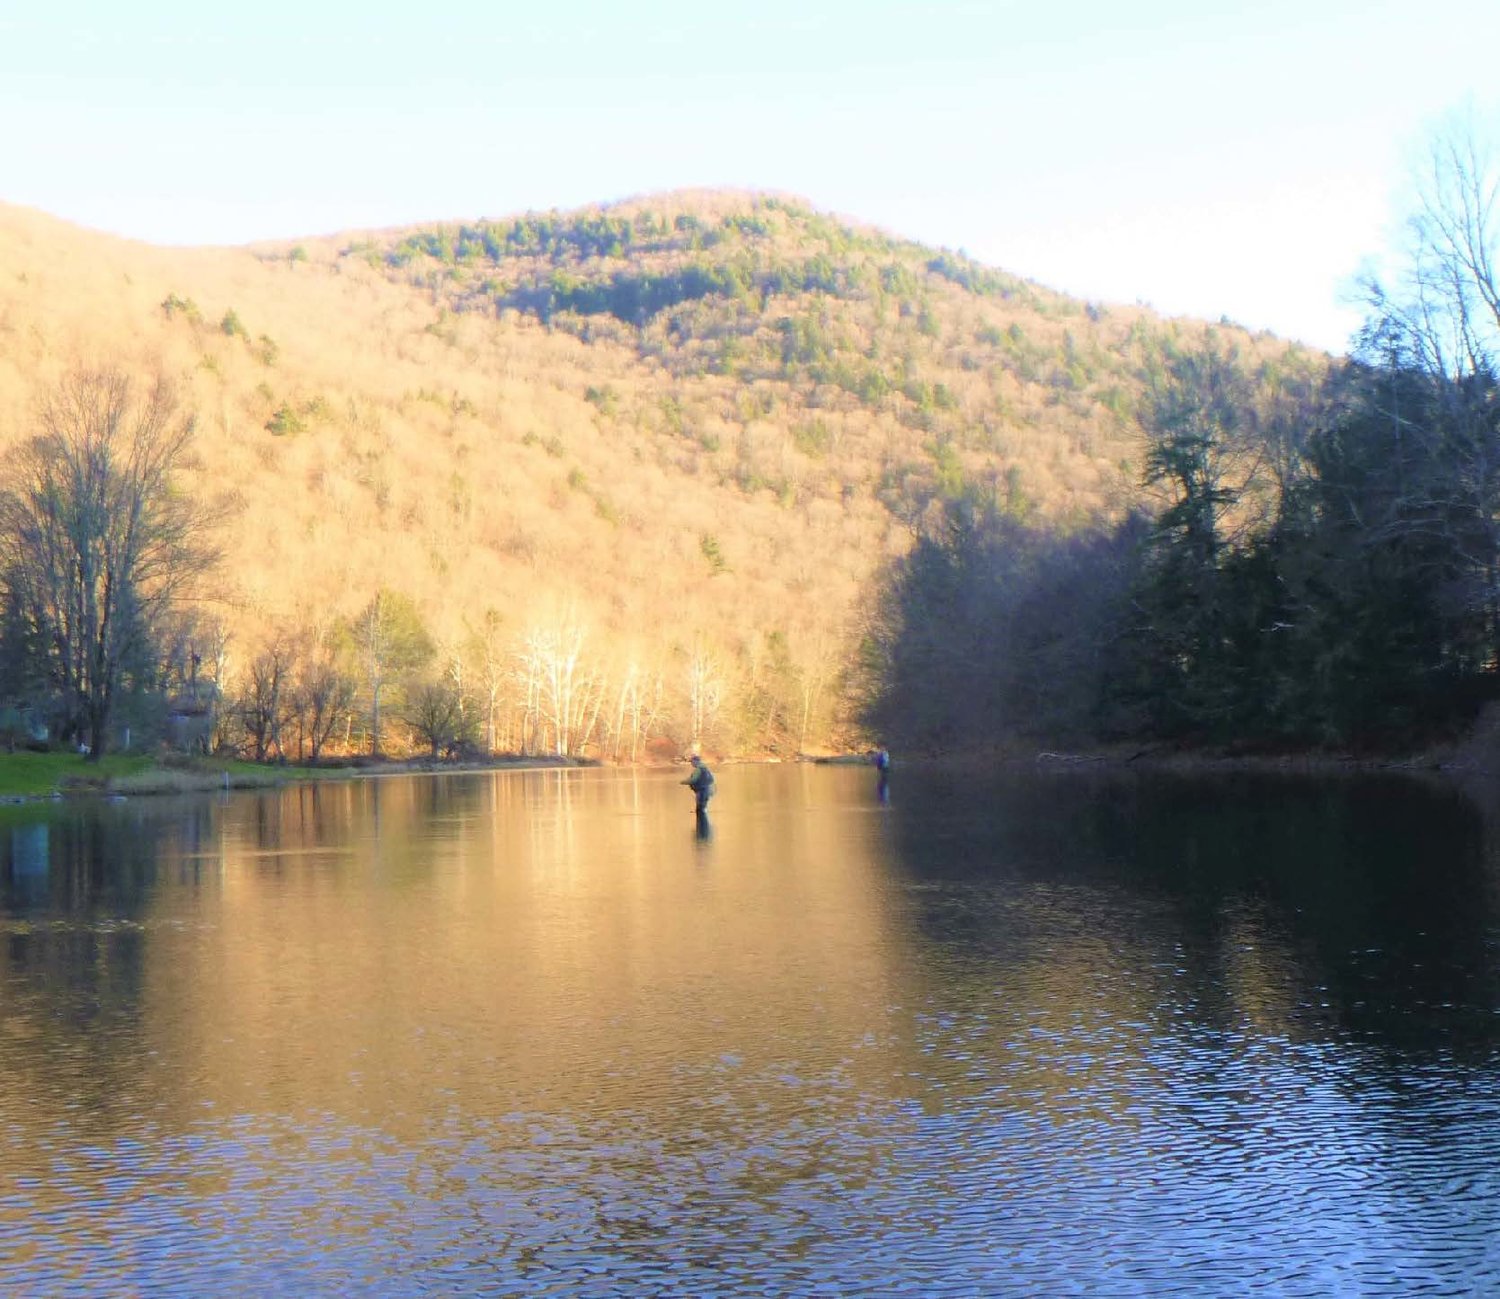 Anglers on the river during a beautiful, late fall day